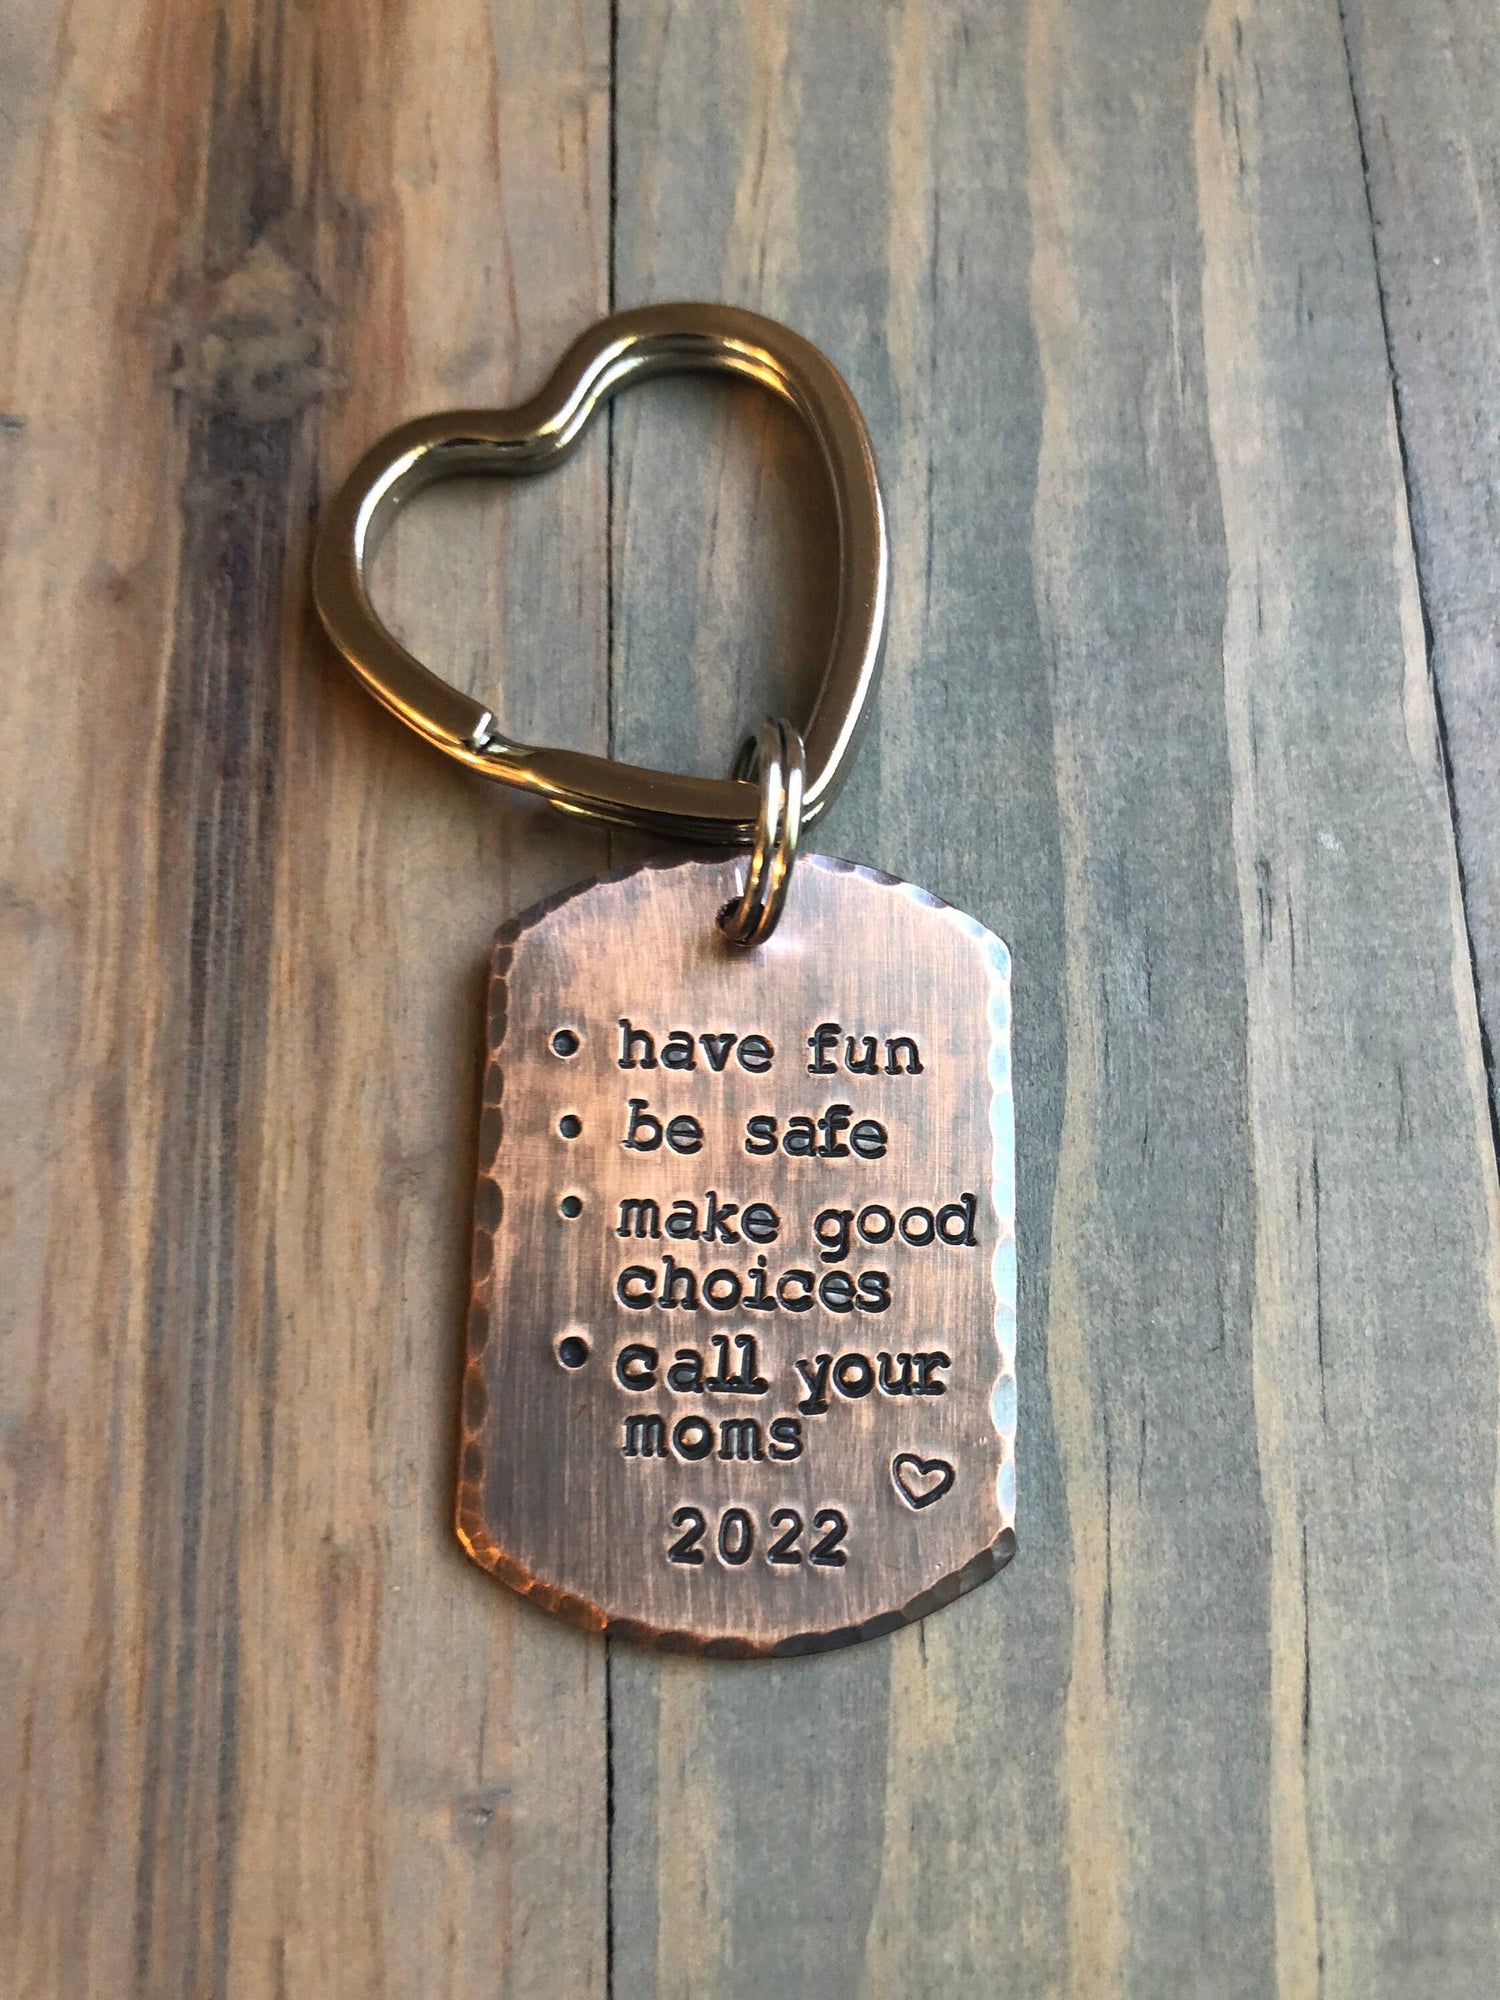 New License Gift, Make Good Choices, Gift for Teens, Call Your Mom Personalized Keychain, New Driver, Graduation Gift, Son, Daughter